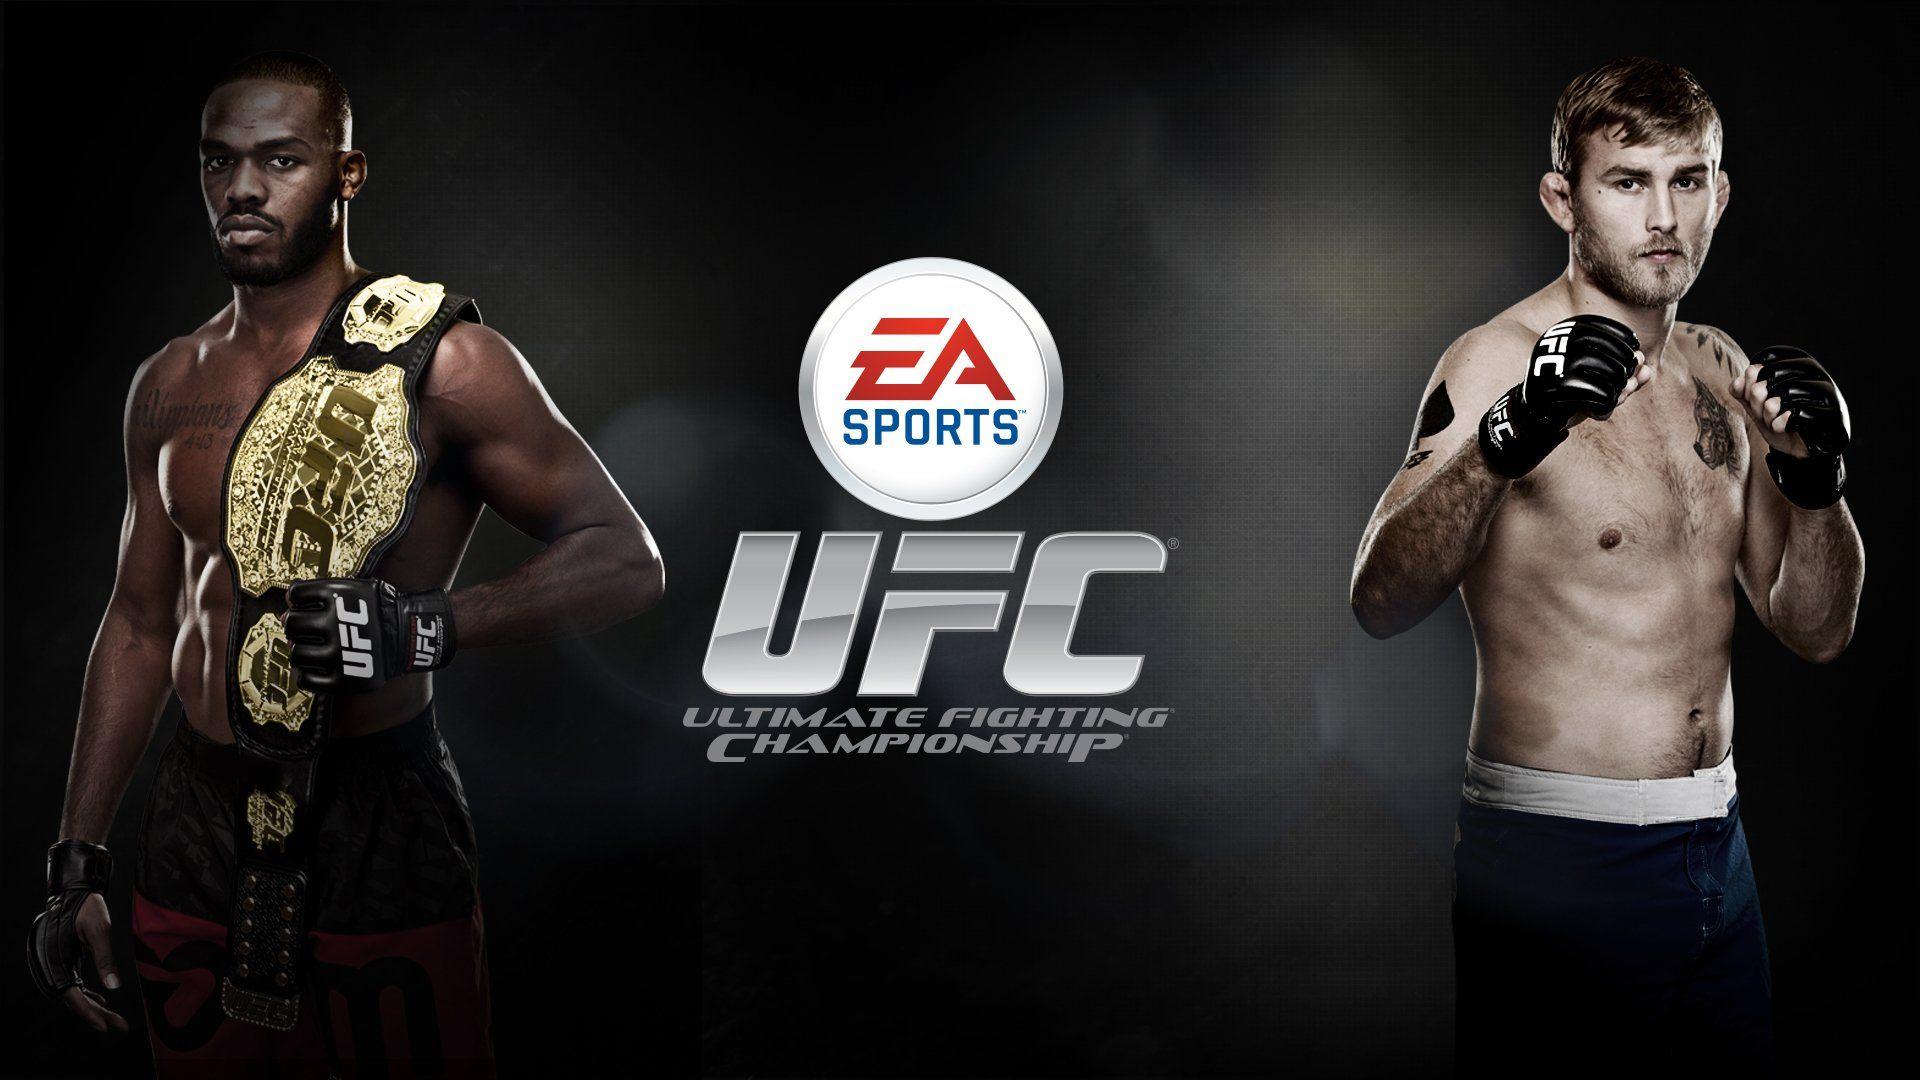 EA Sports UFC HD Wallpaper and Background Image